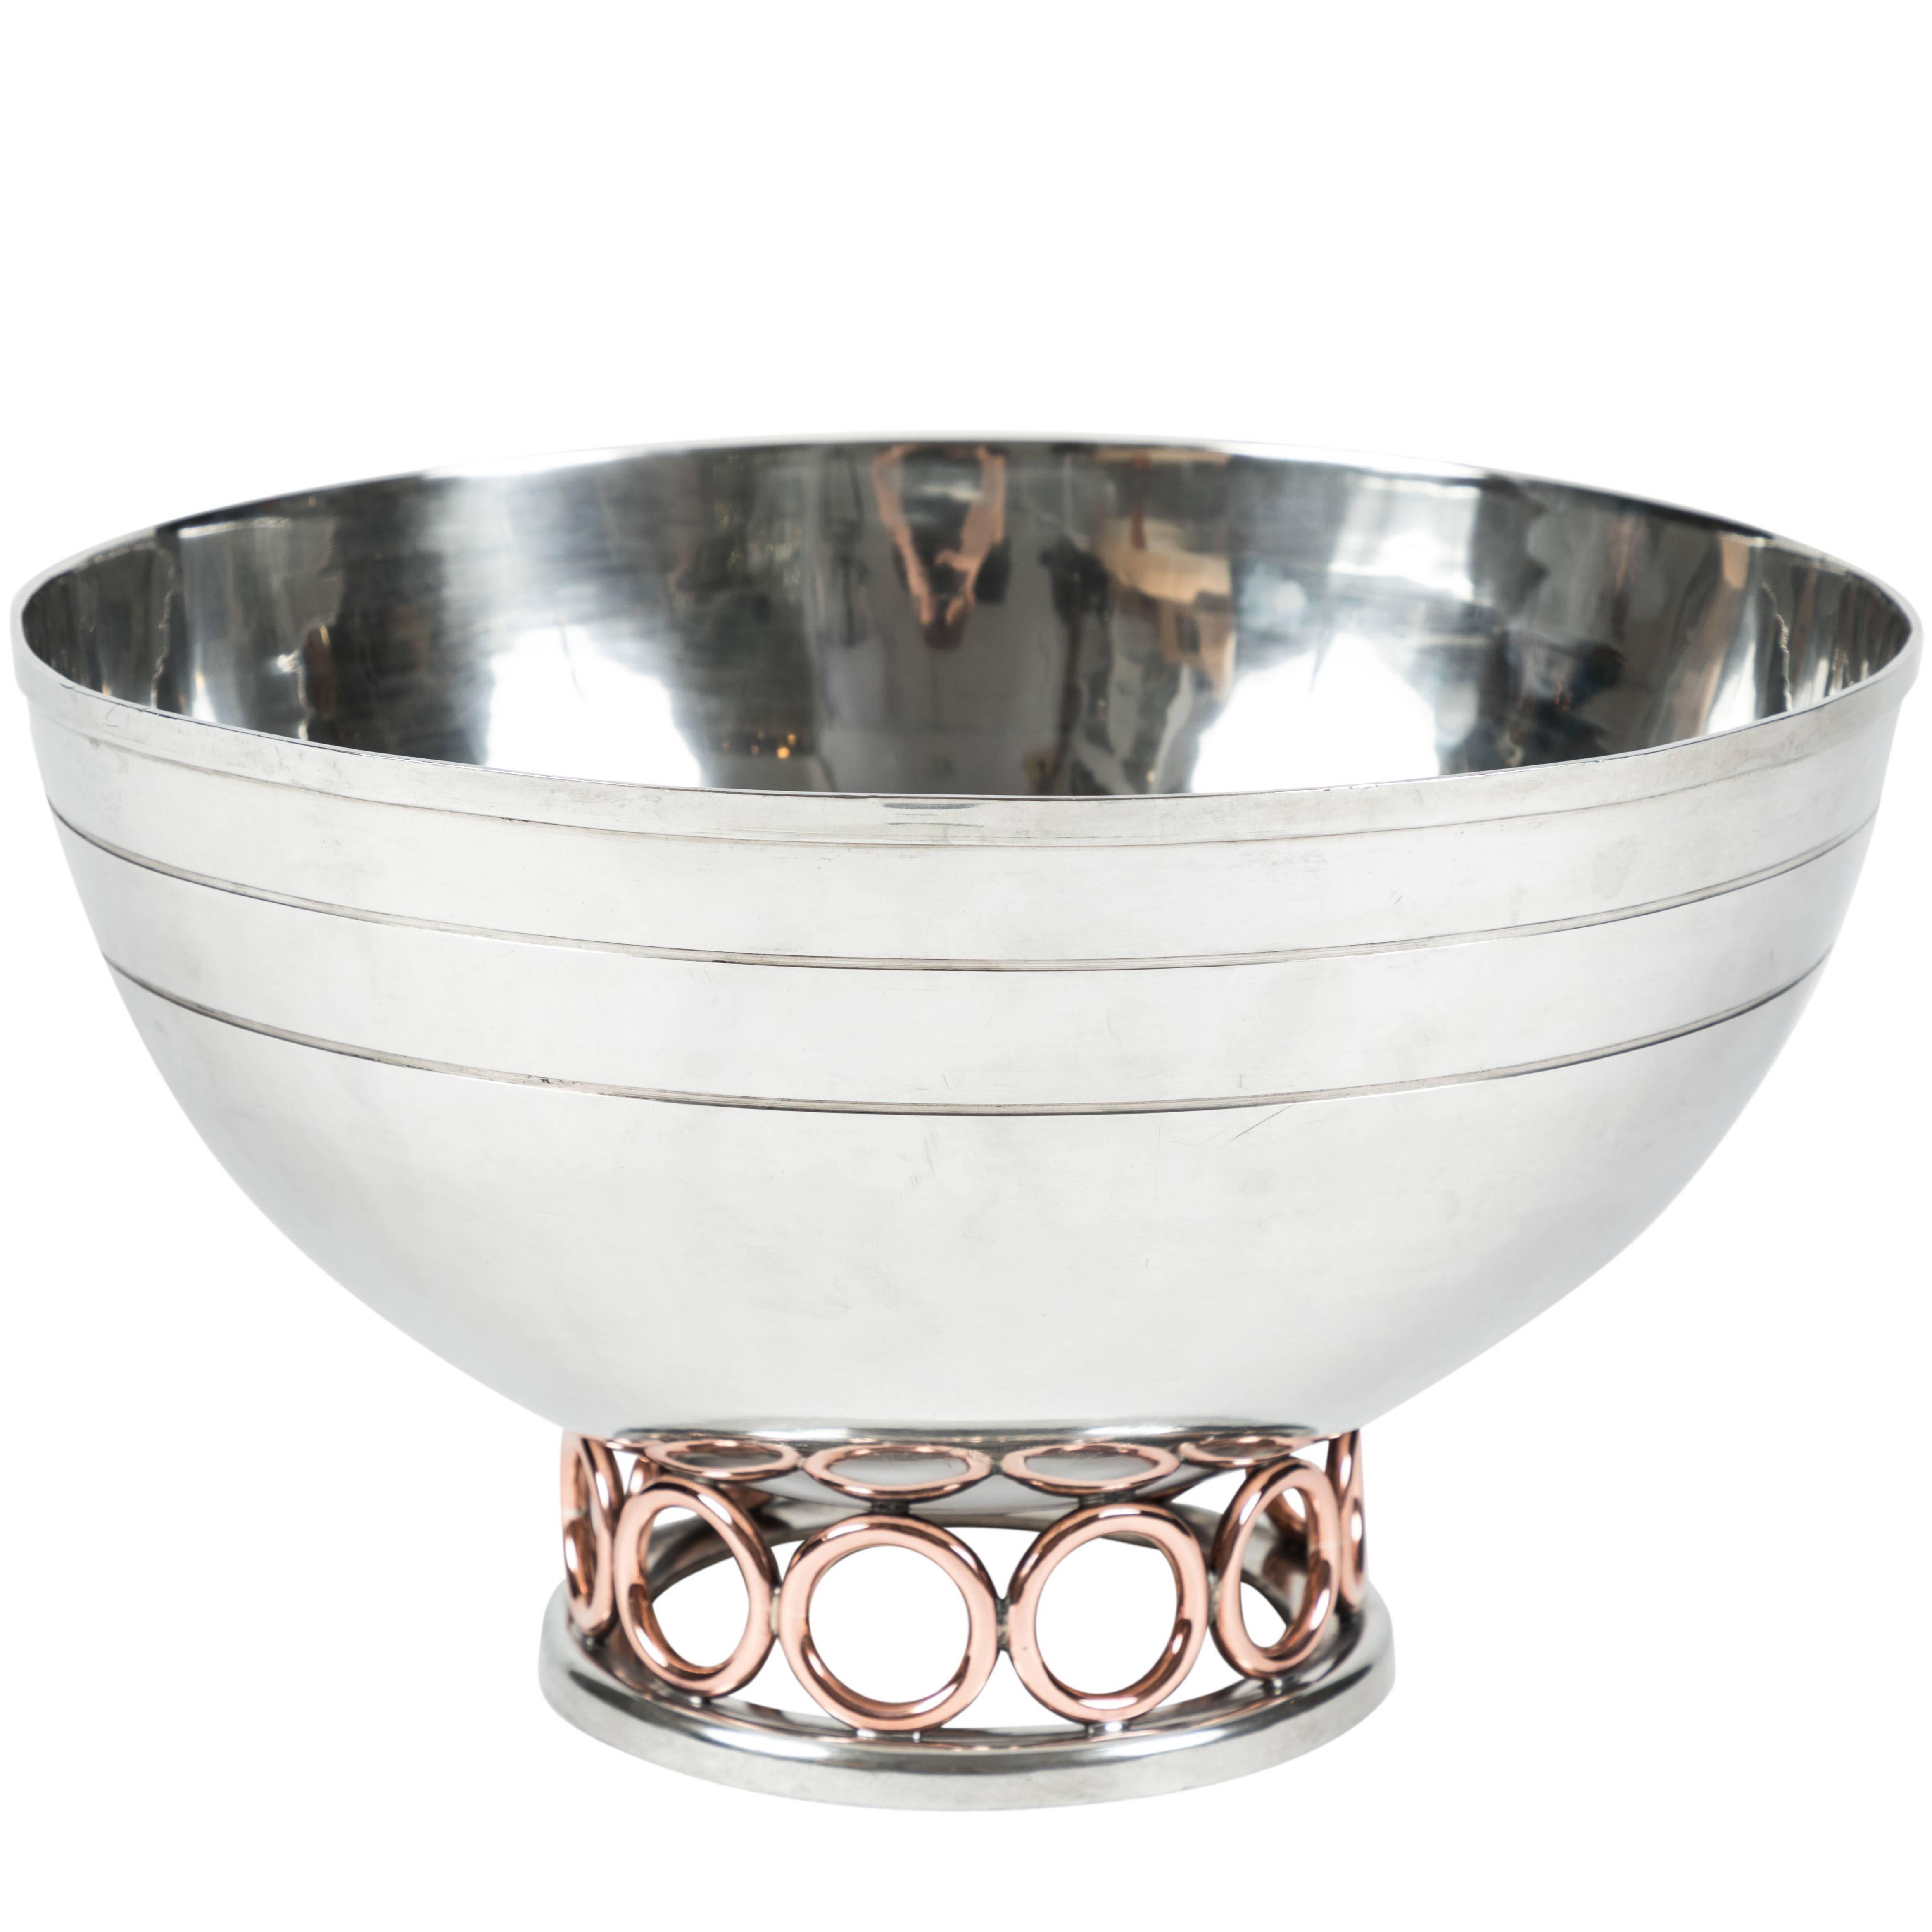 Colonial Pewter Bowl with Copper Accents by Porter Blanchard